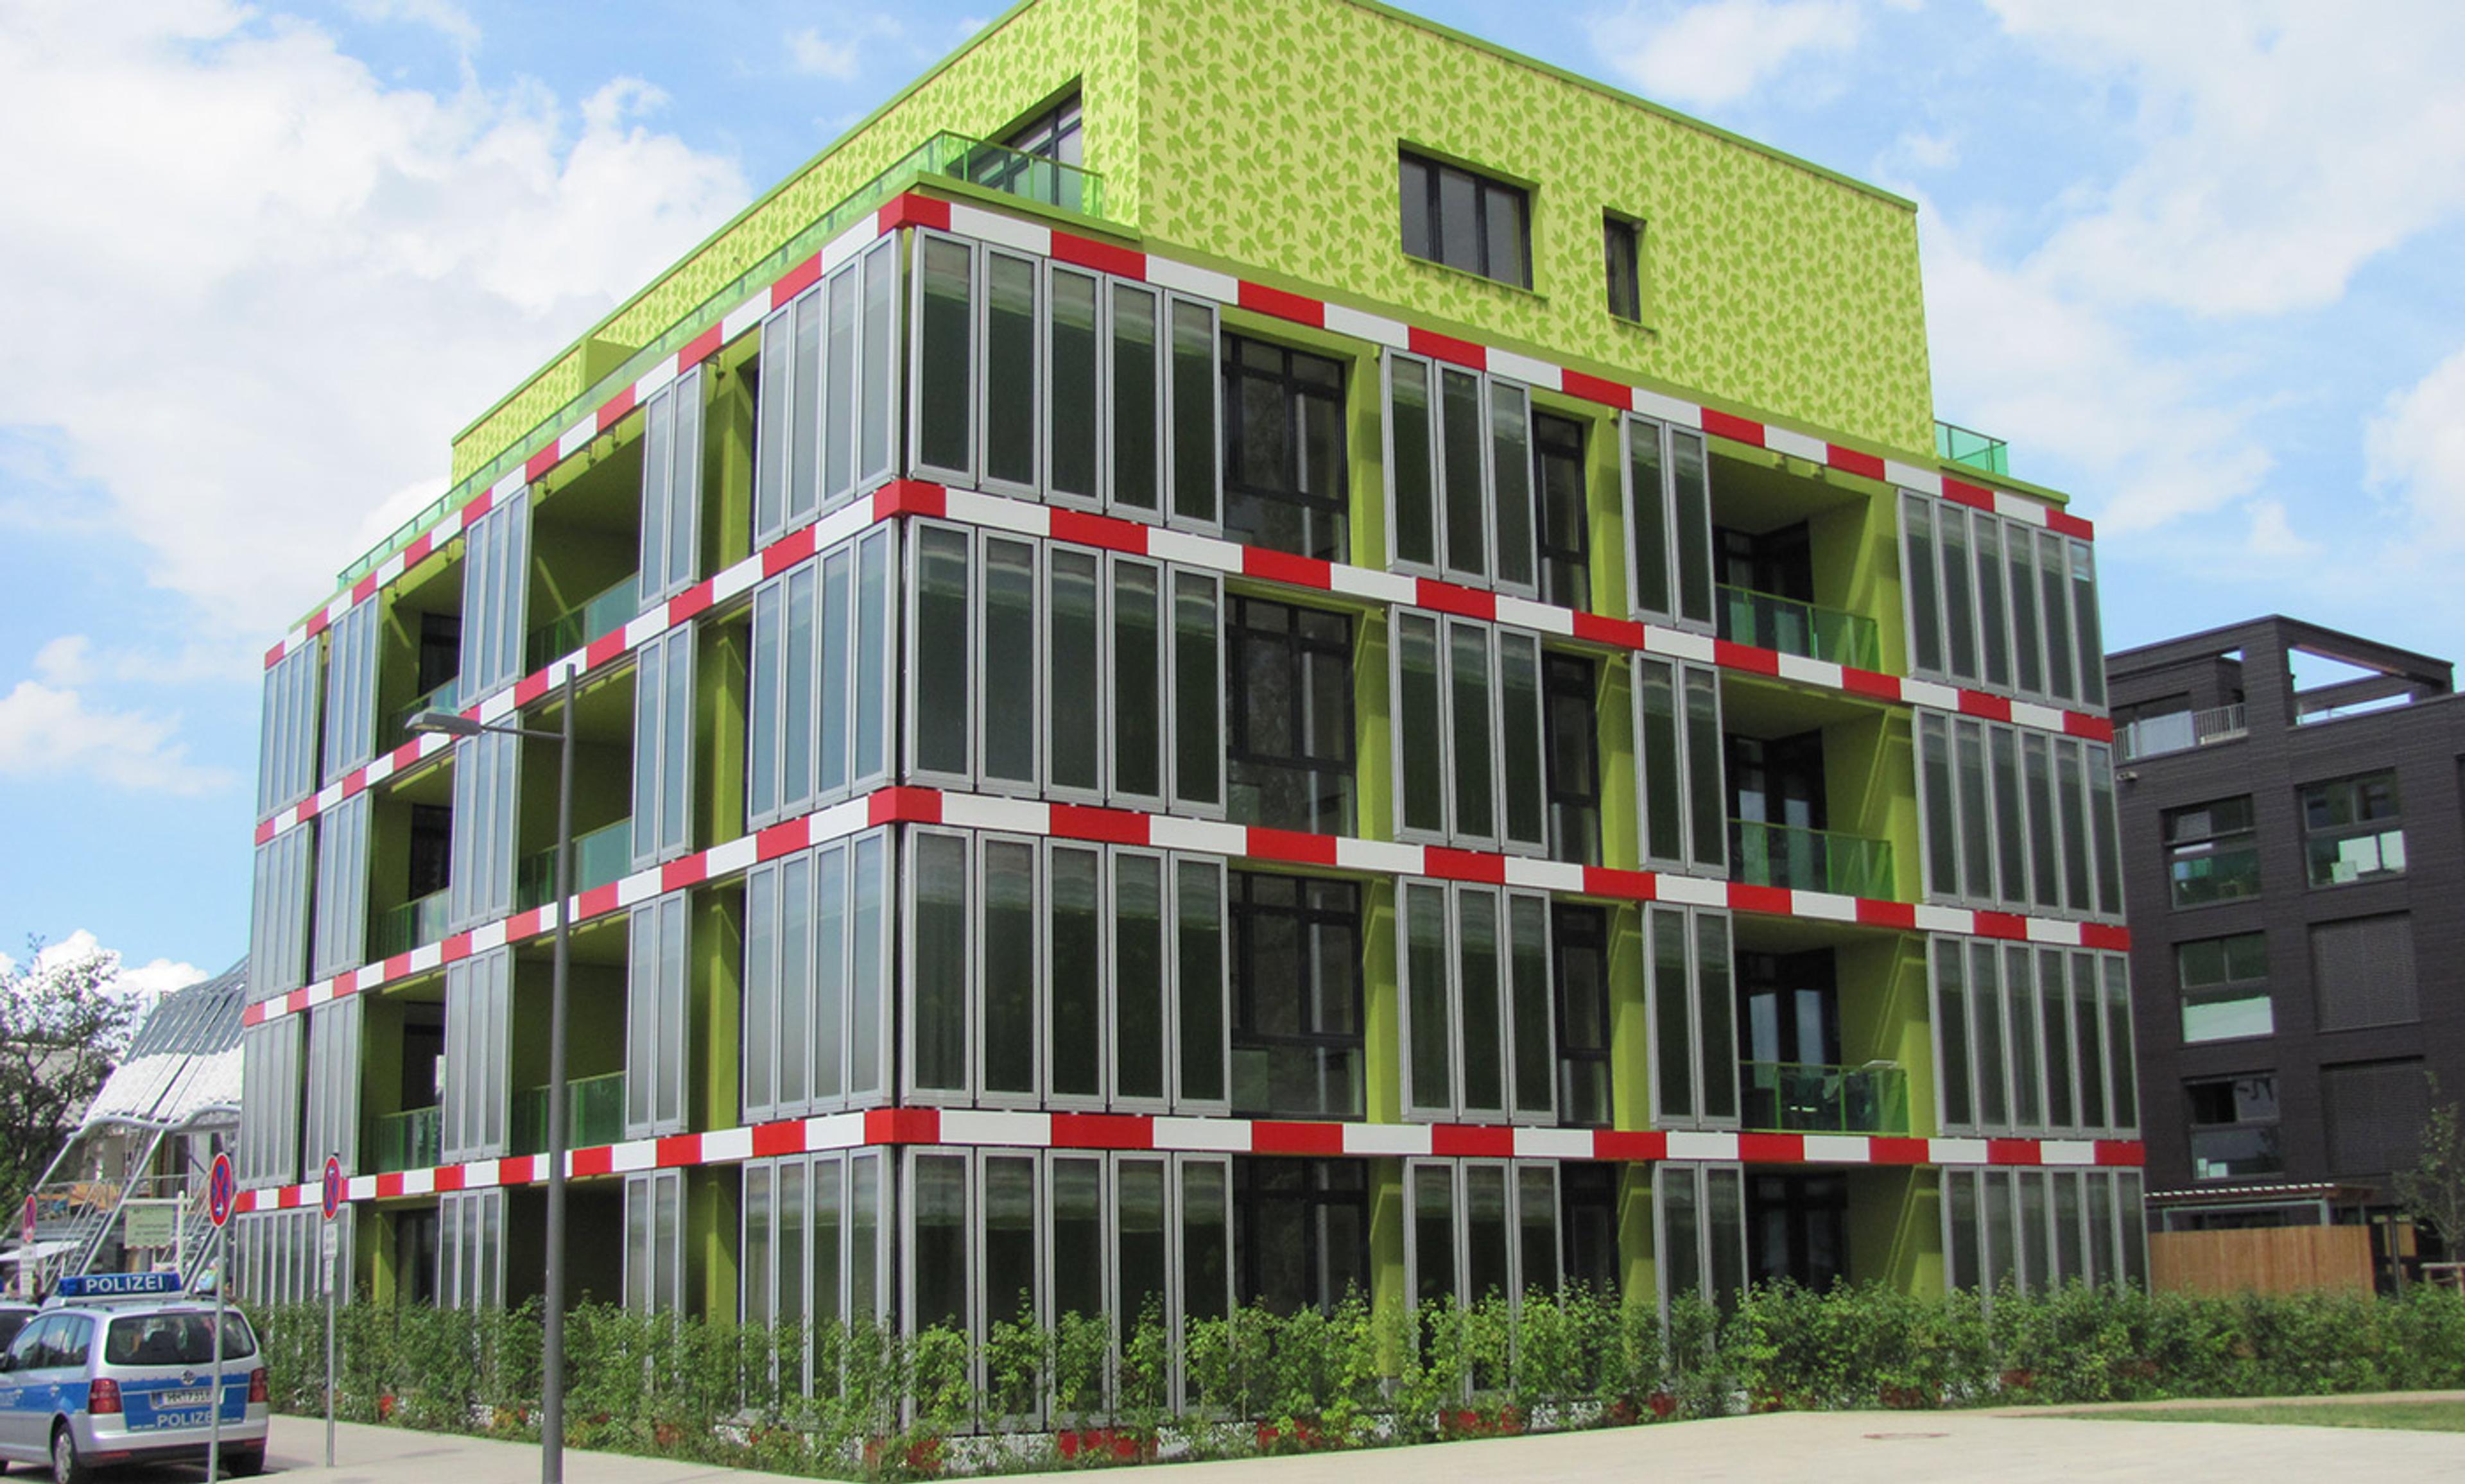 <p>The facade of the BIQ (Bio Intelligent Quotient) house in Hamburg has tanks filled with microalgae that produce biomass used to generate electricity. <em>Photo courtesy Wikipedia</em></p>